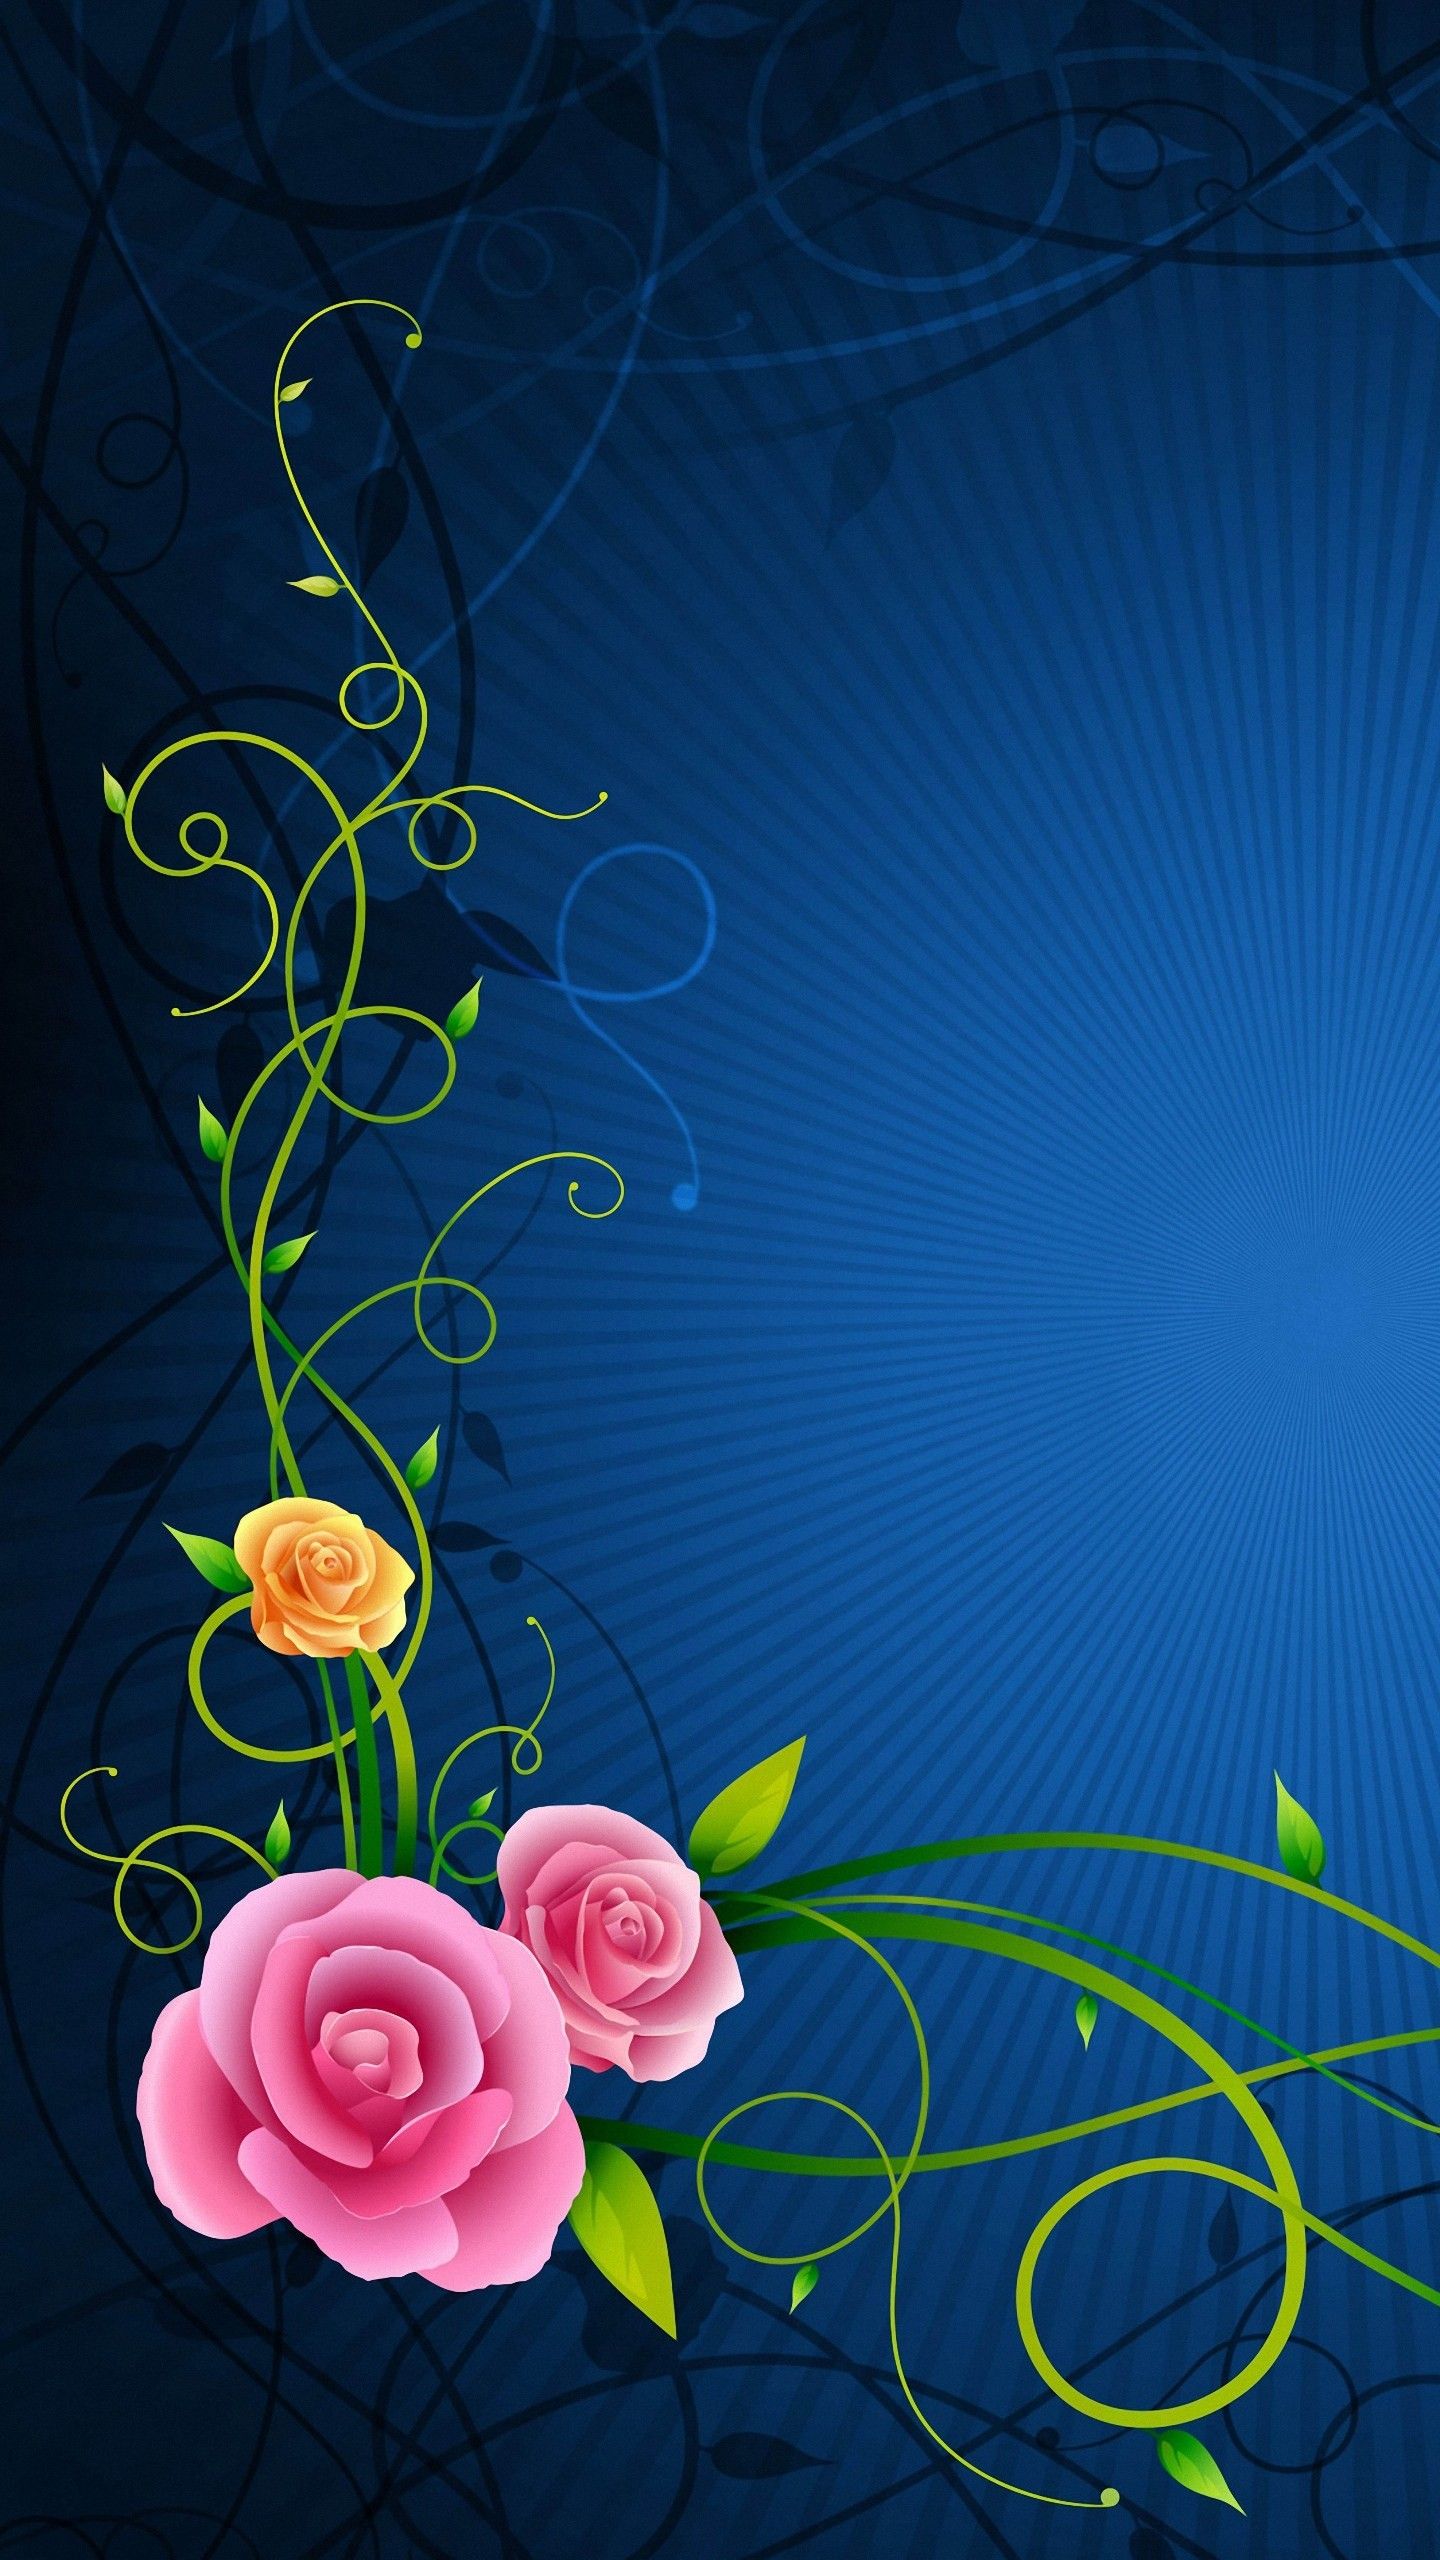 Flowers Lines Patterns HD Wallpaper For Android Mobile Blessing Good Morning